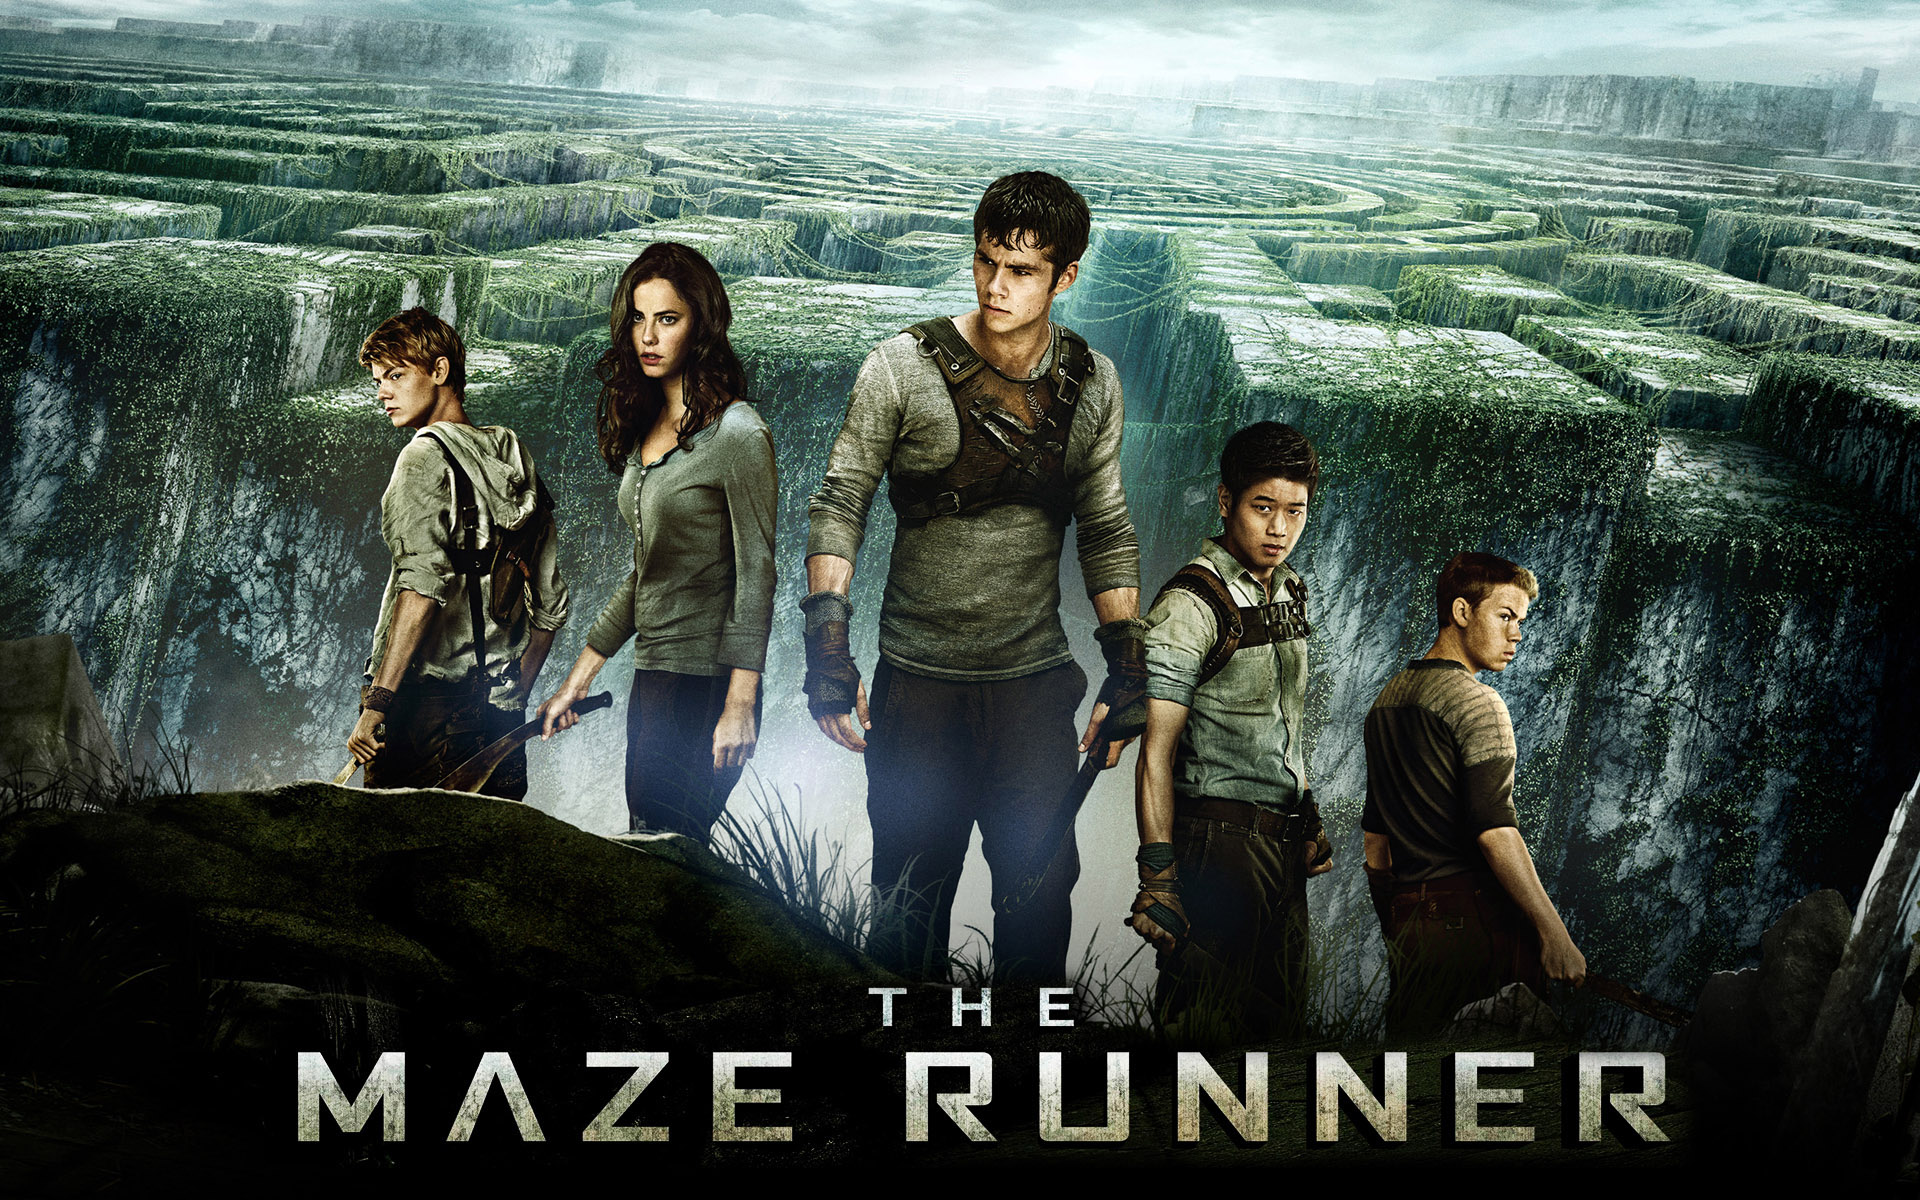 the maze runner wallpaper,action adventure game,movie,adventure game,poster,album cover